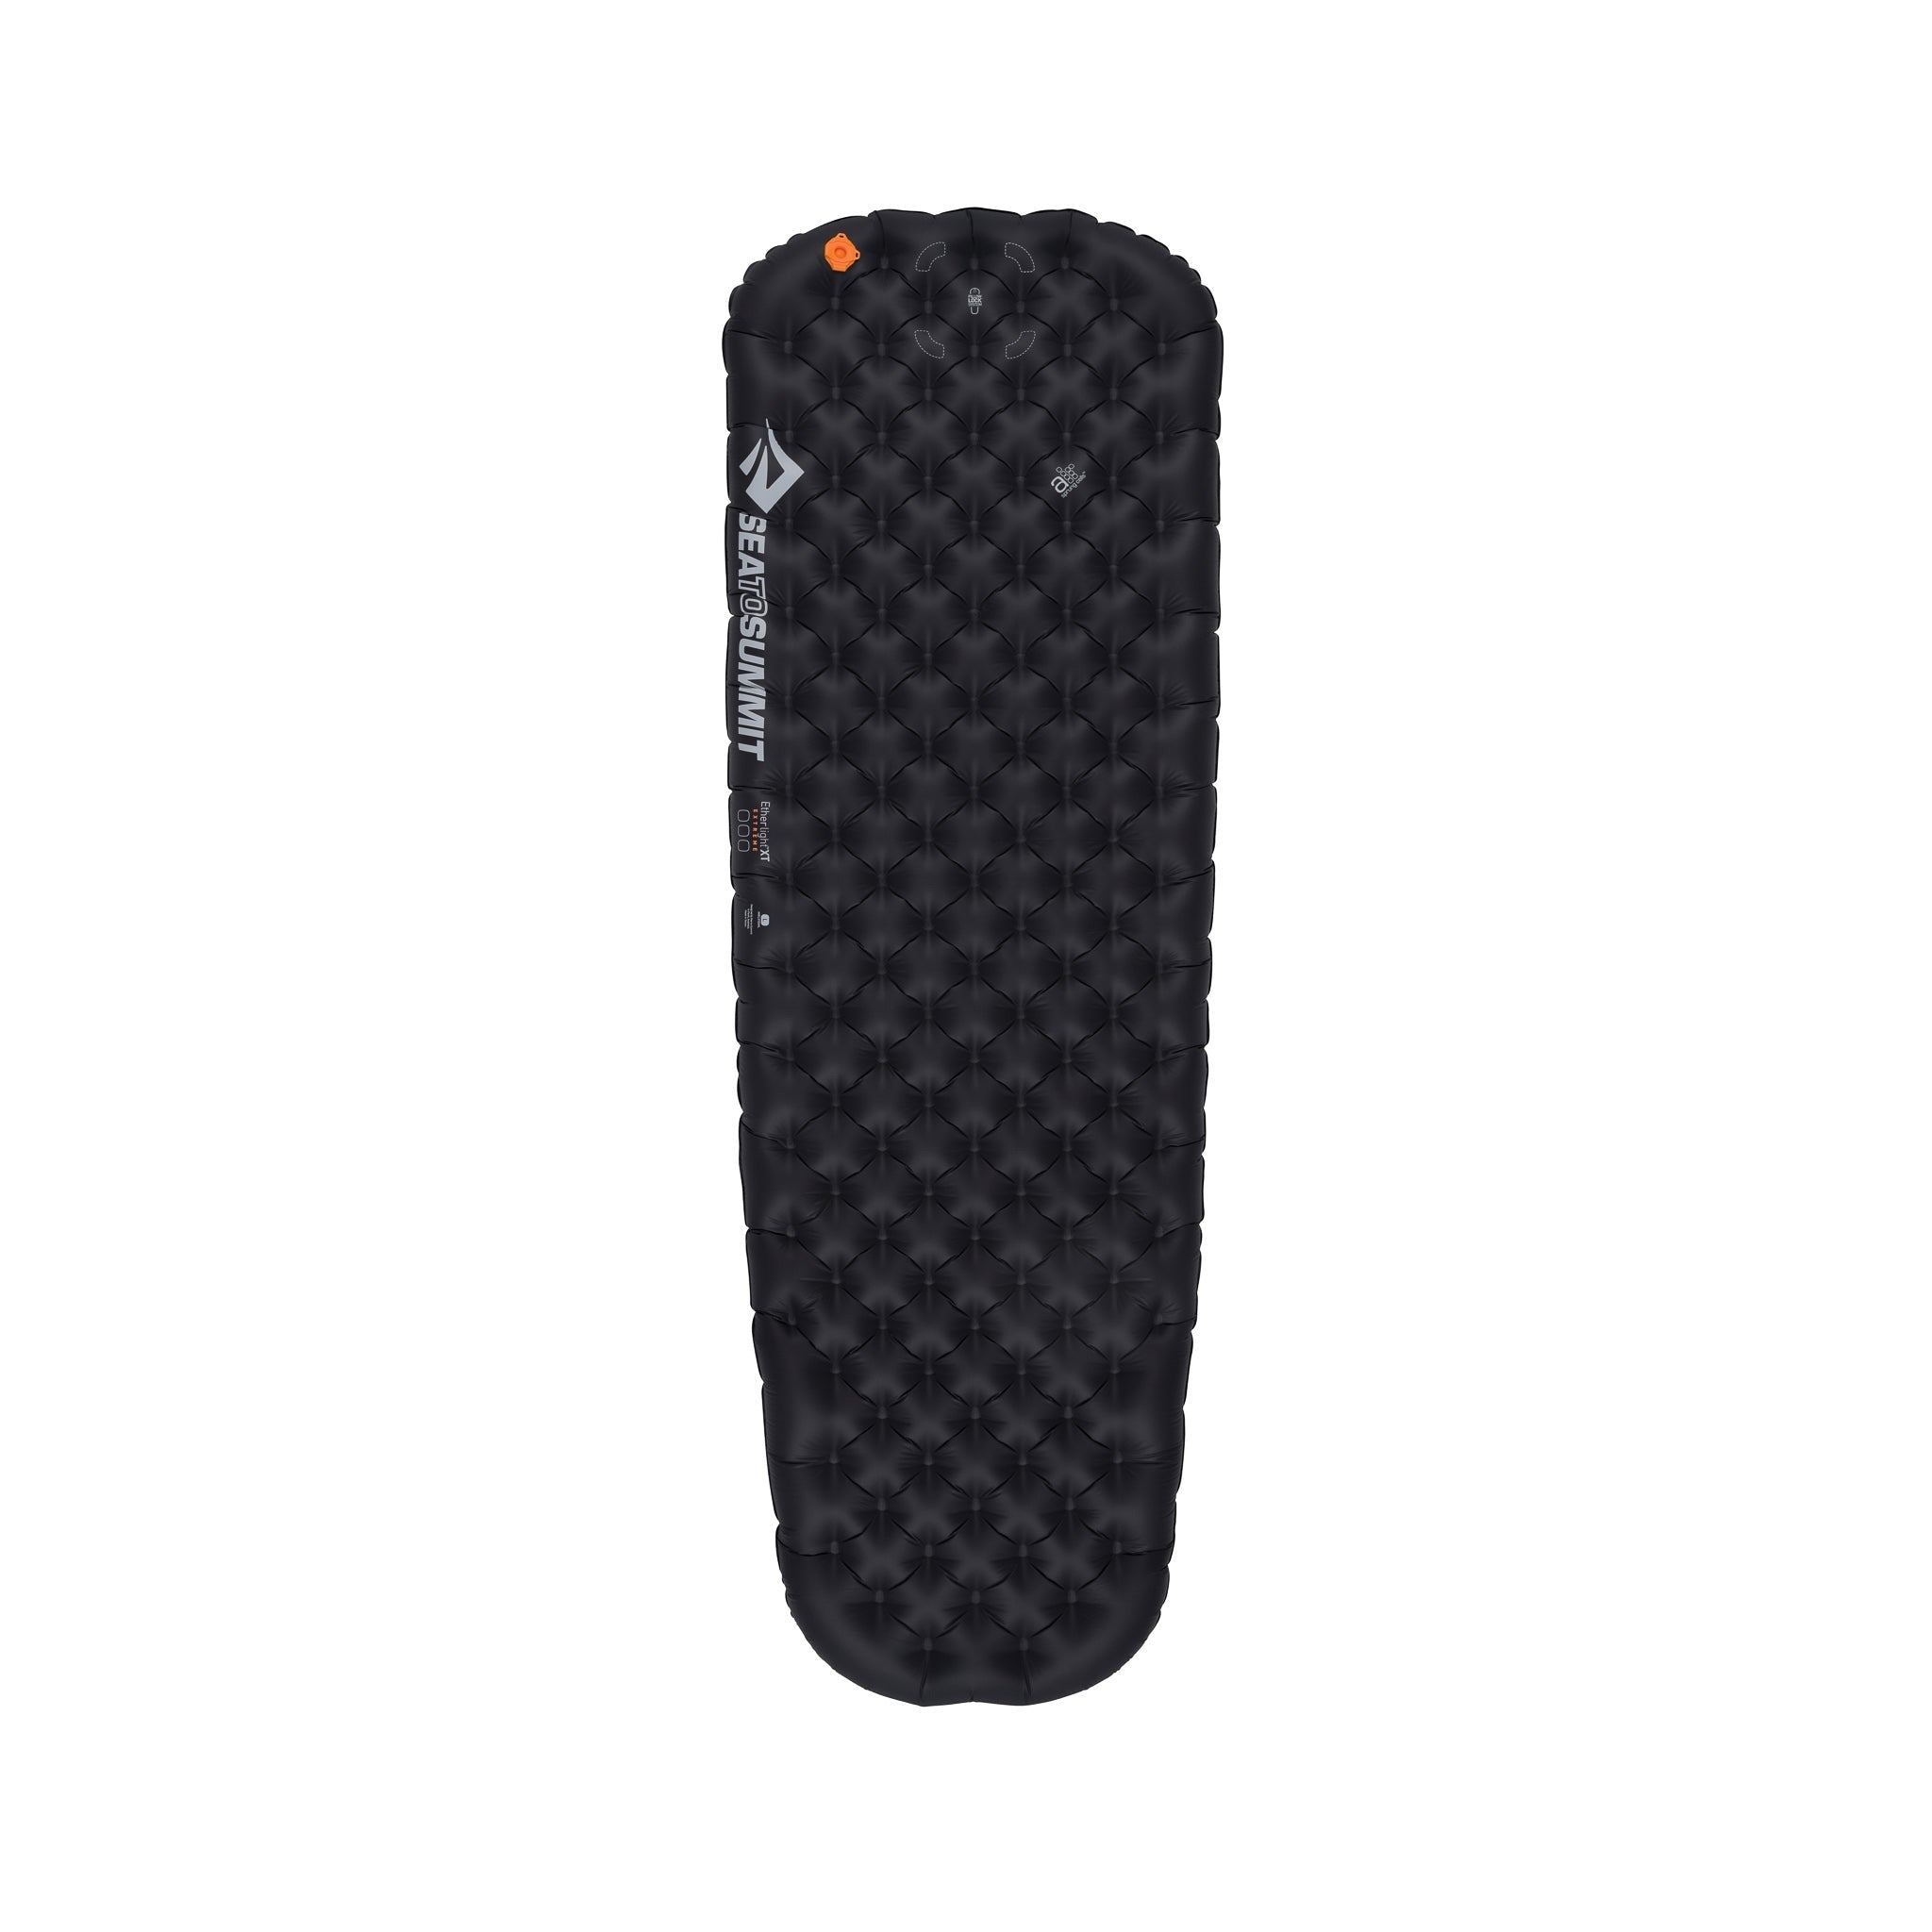 Large || Ether Light XT Extreme Insulated Air Sleeping Pad